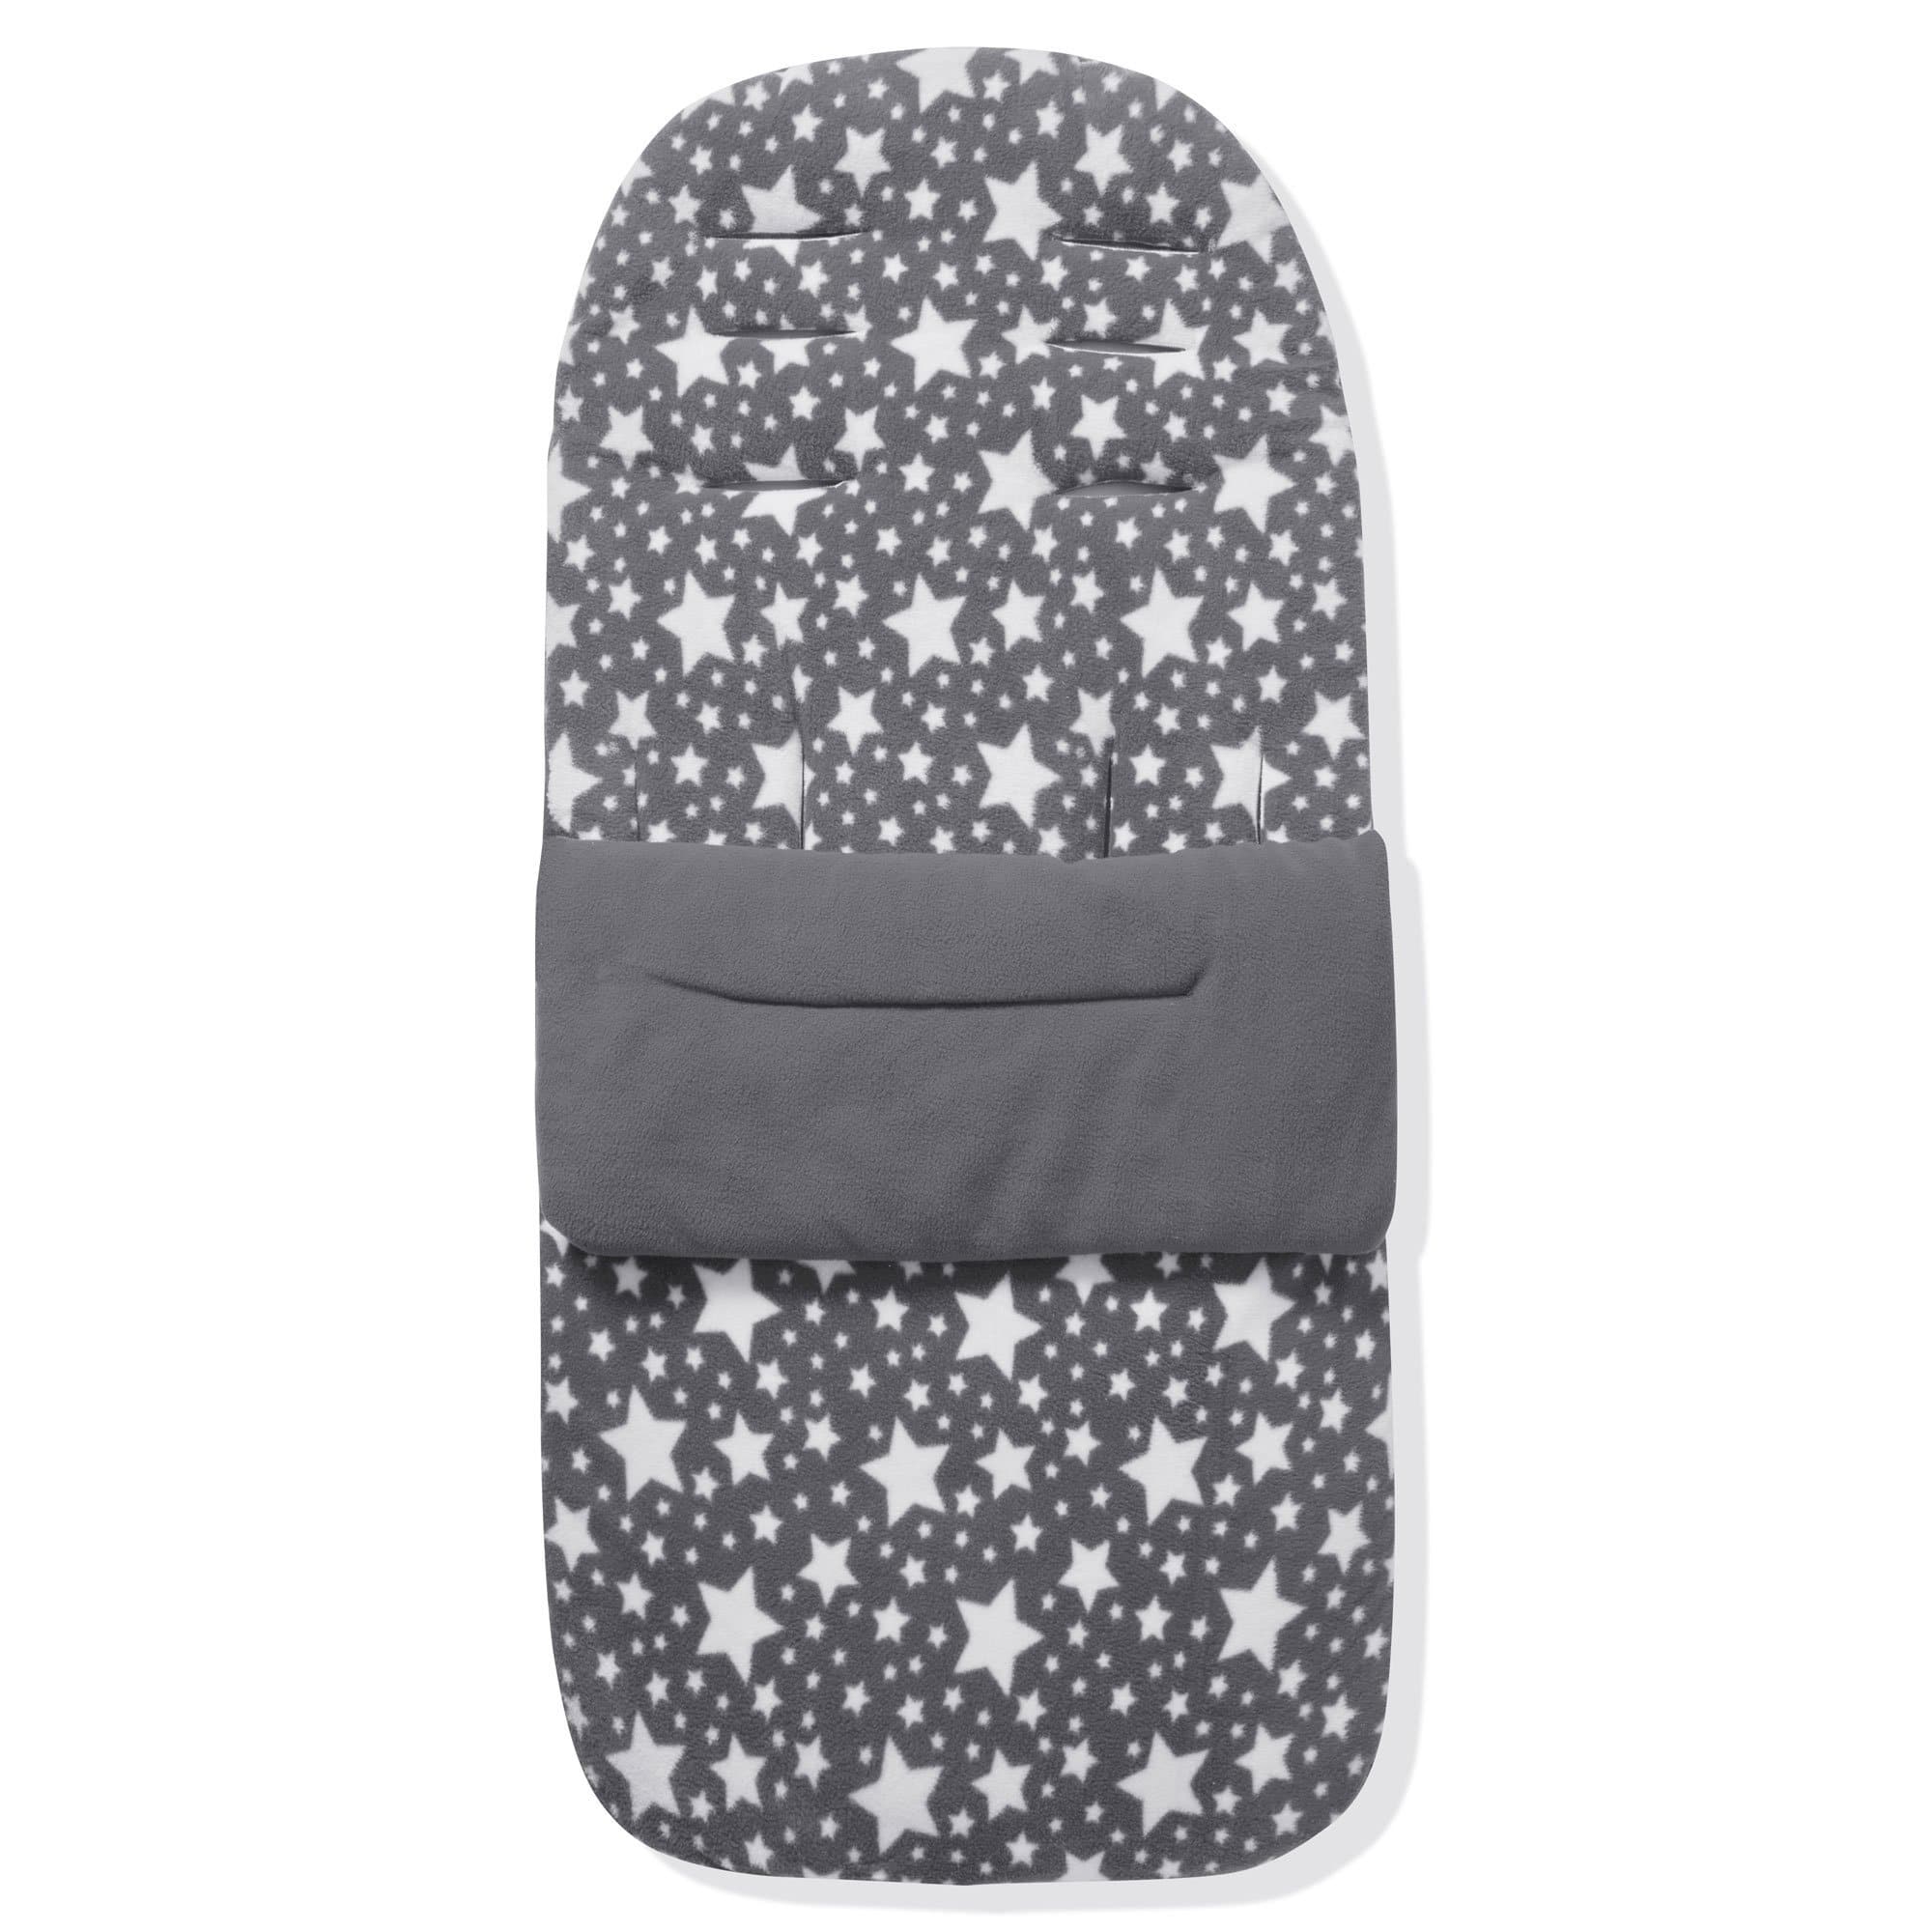 Fleece Footmuff / Cosy Toes Compatible with Egg - Grey Star / Fits All Models | For Your Little One